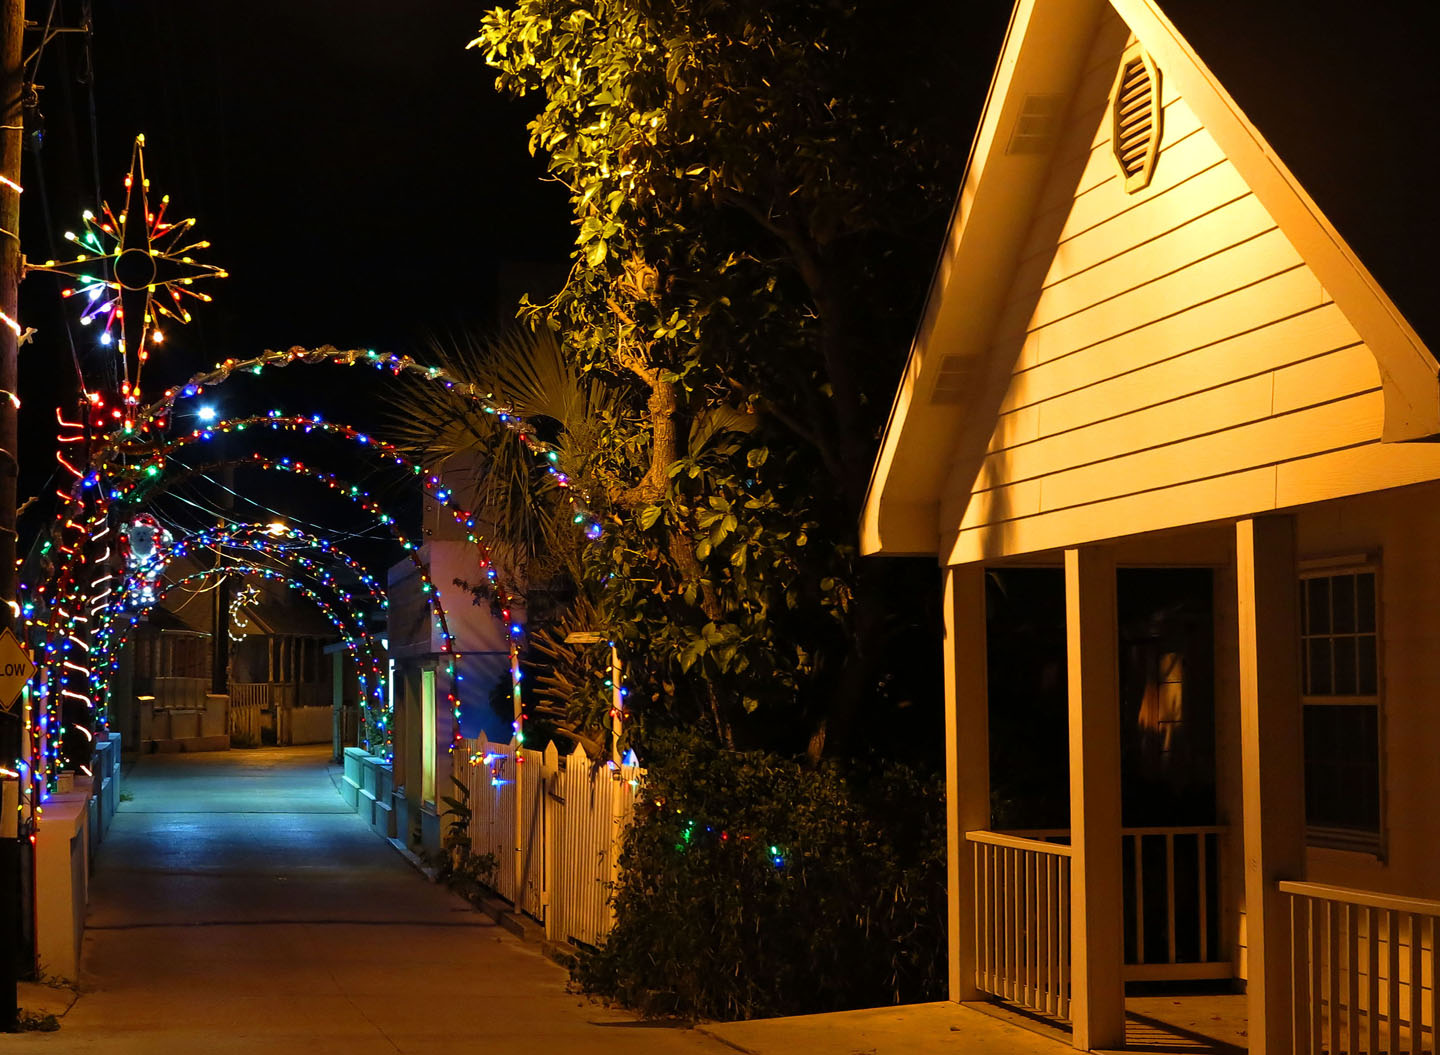 Festival of Lights - Green Turtle Cay